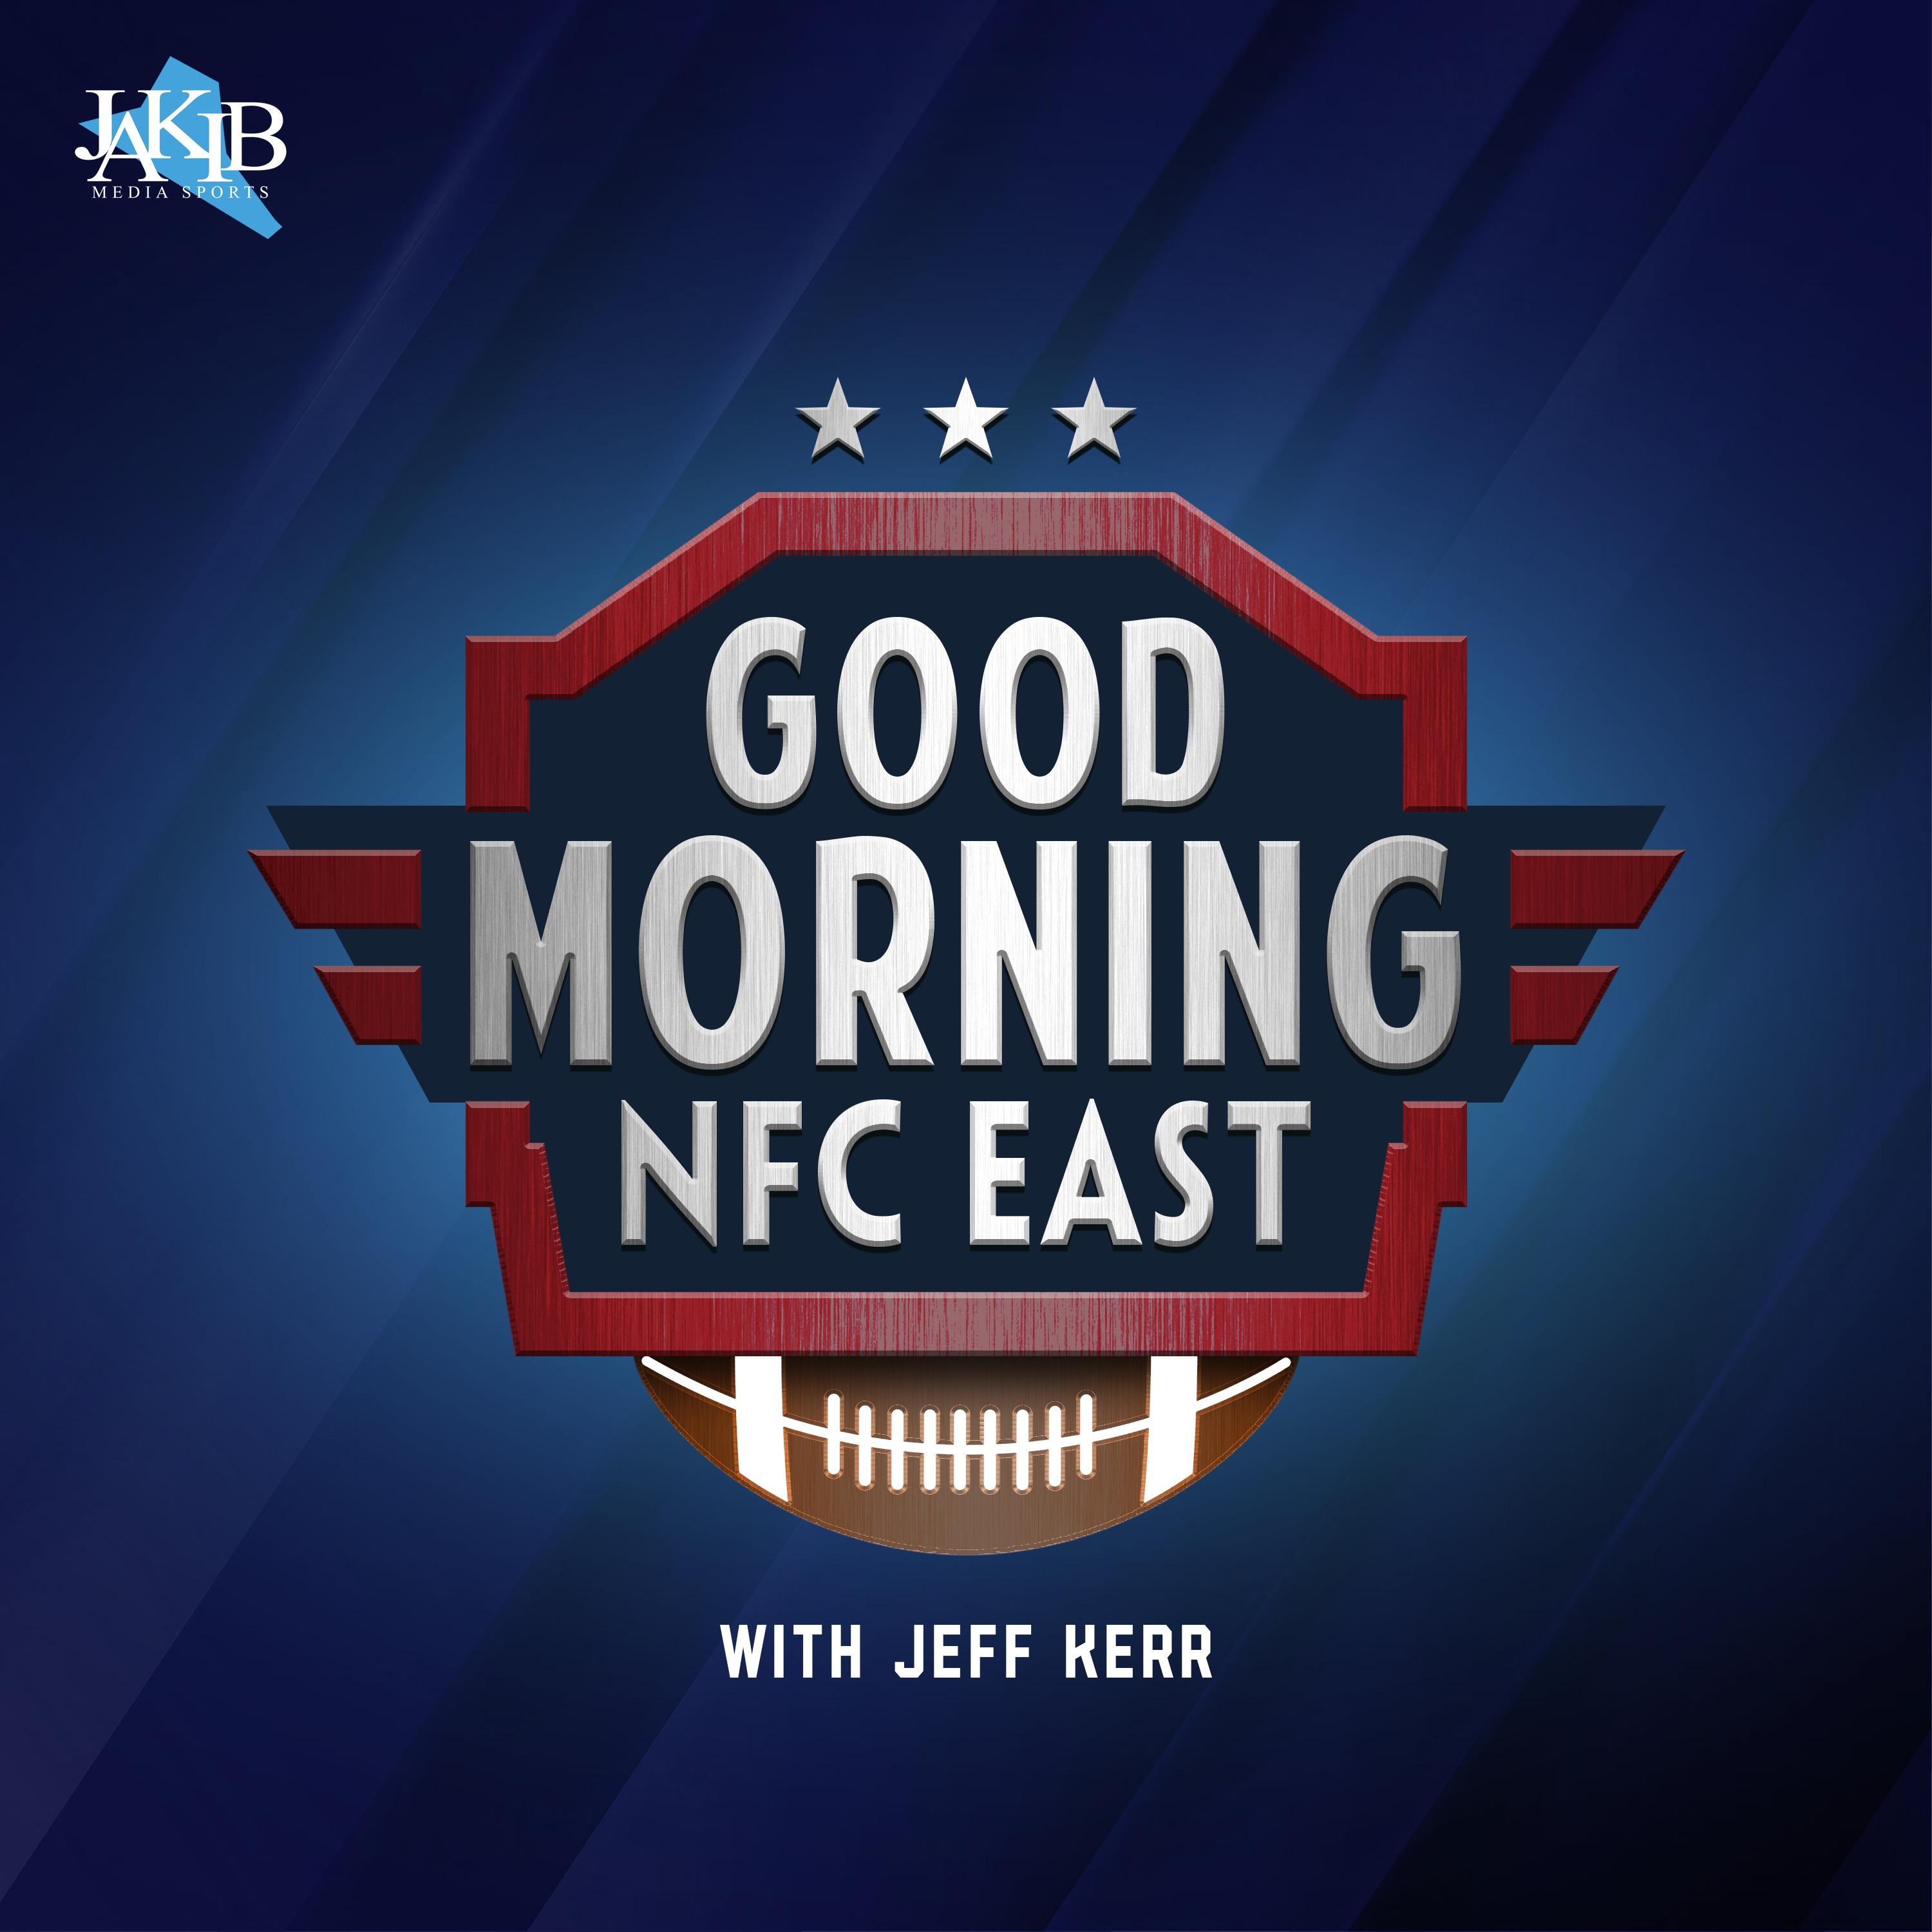 Good Morning NFC East with Jeff Kerr